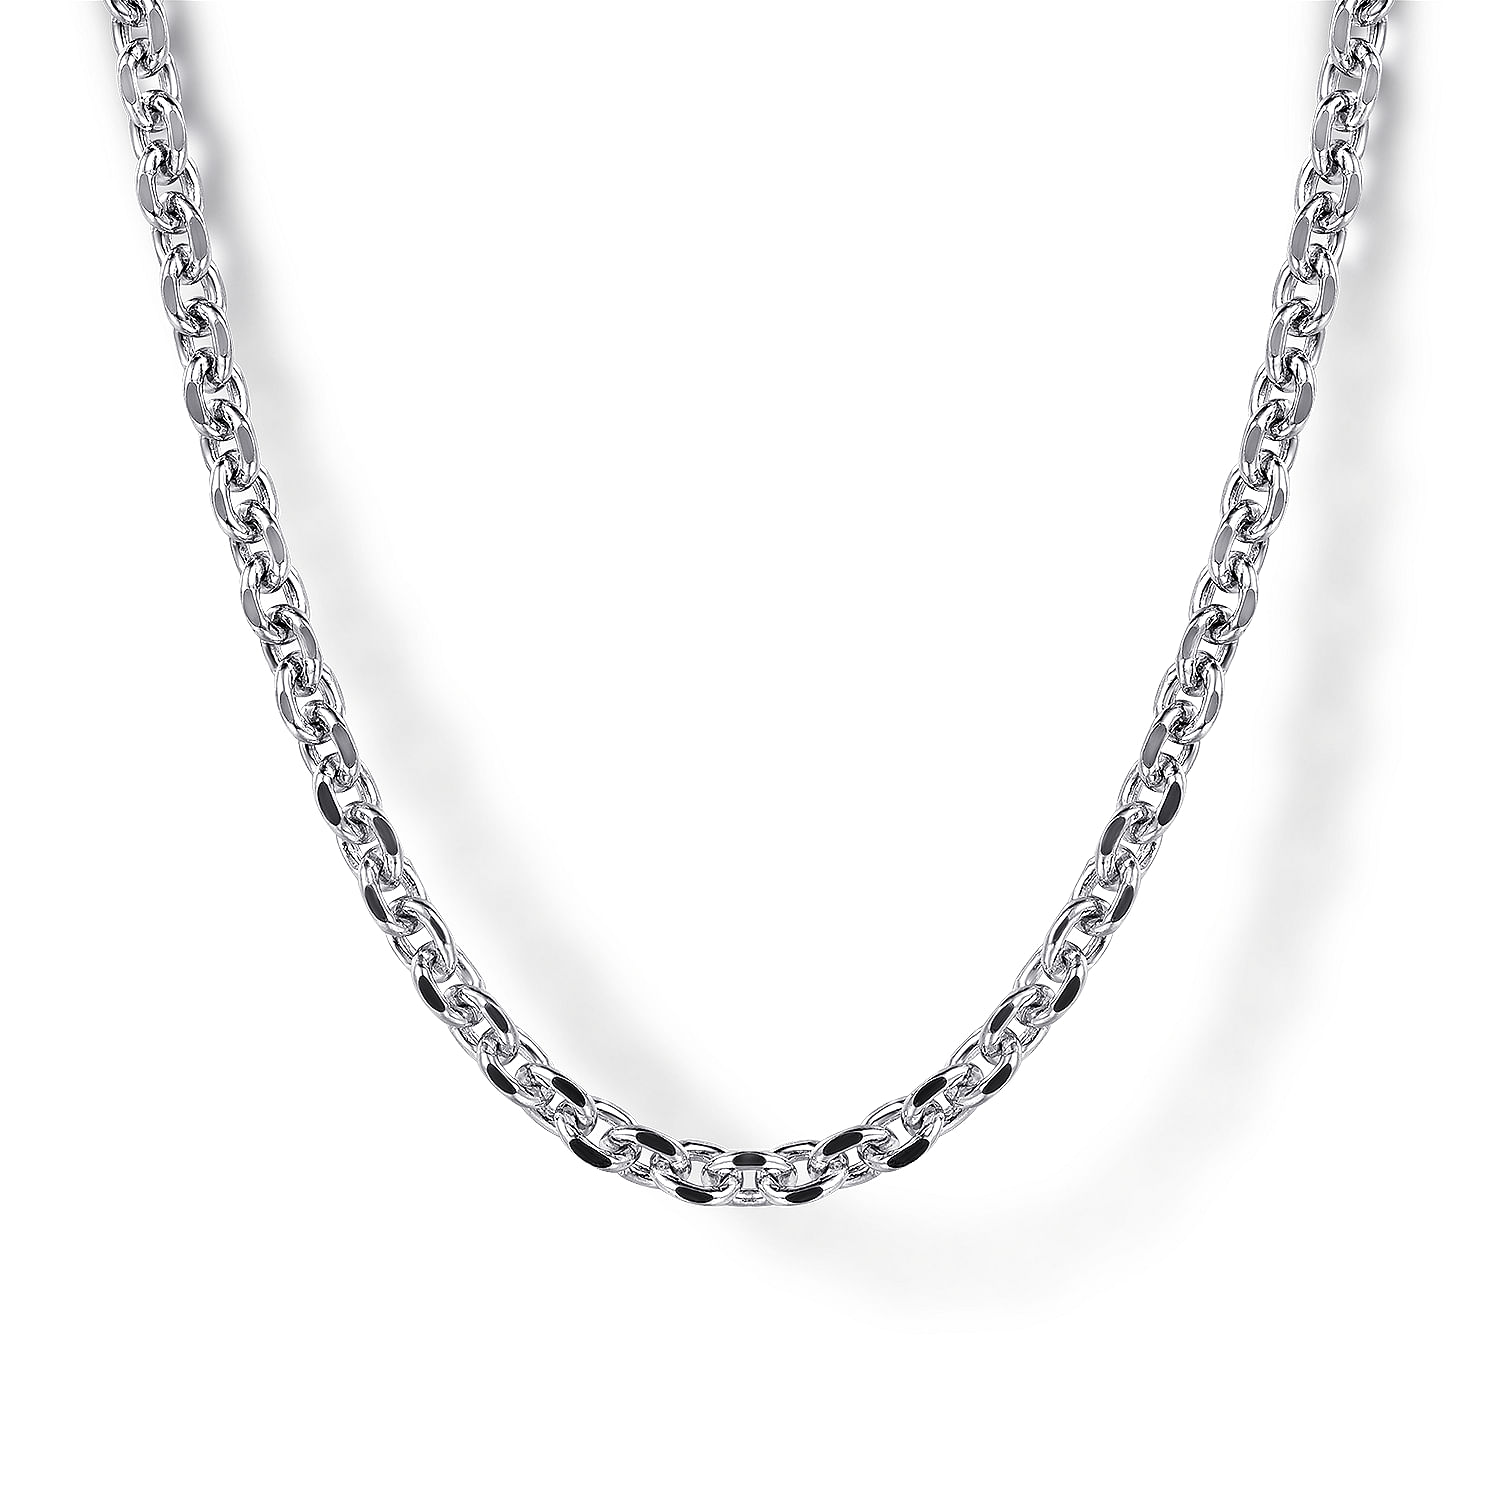 22 Inch 925 Sterling Silver Solid Men's Link Chain Necklace